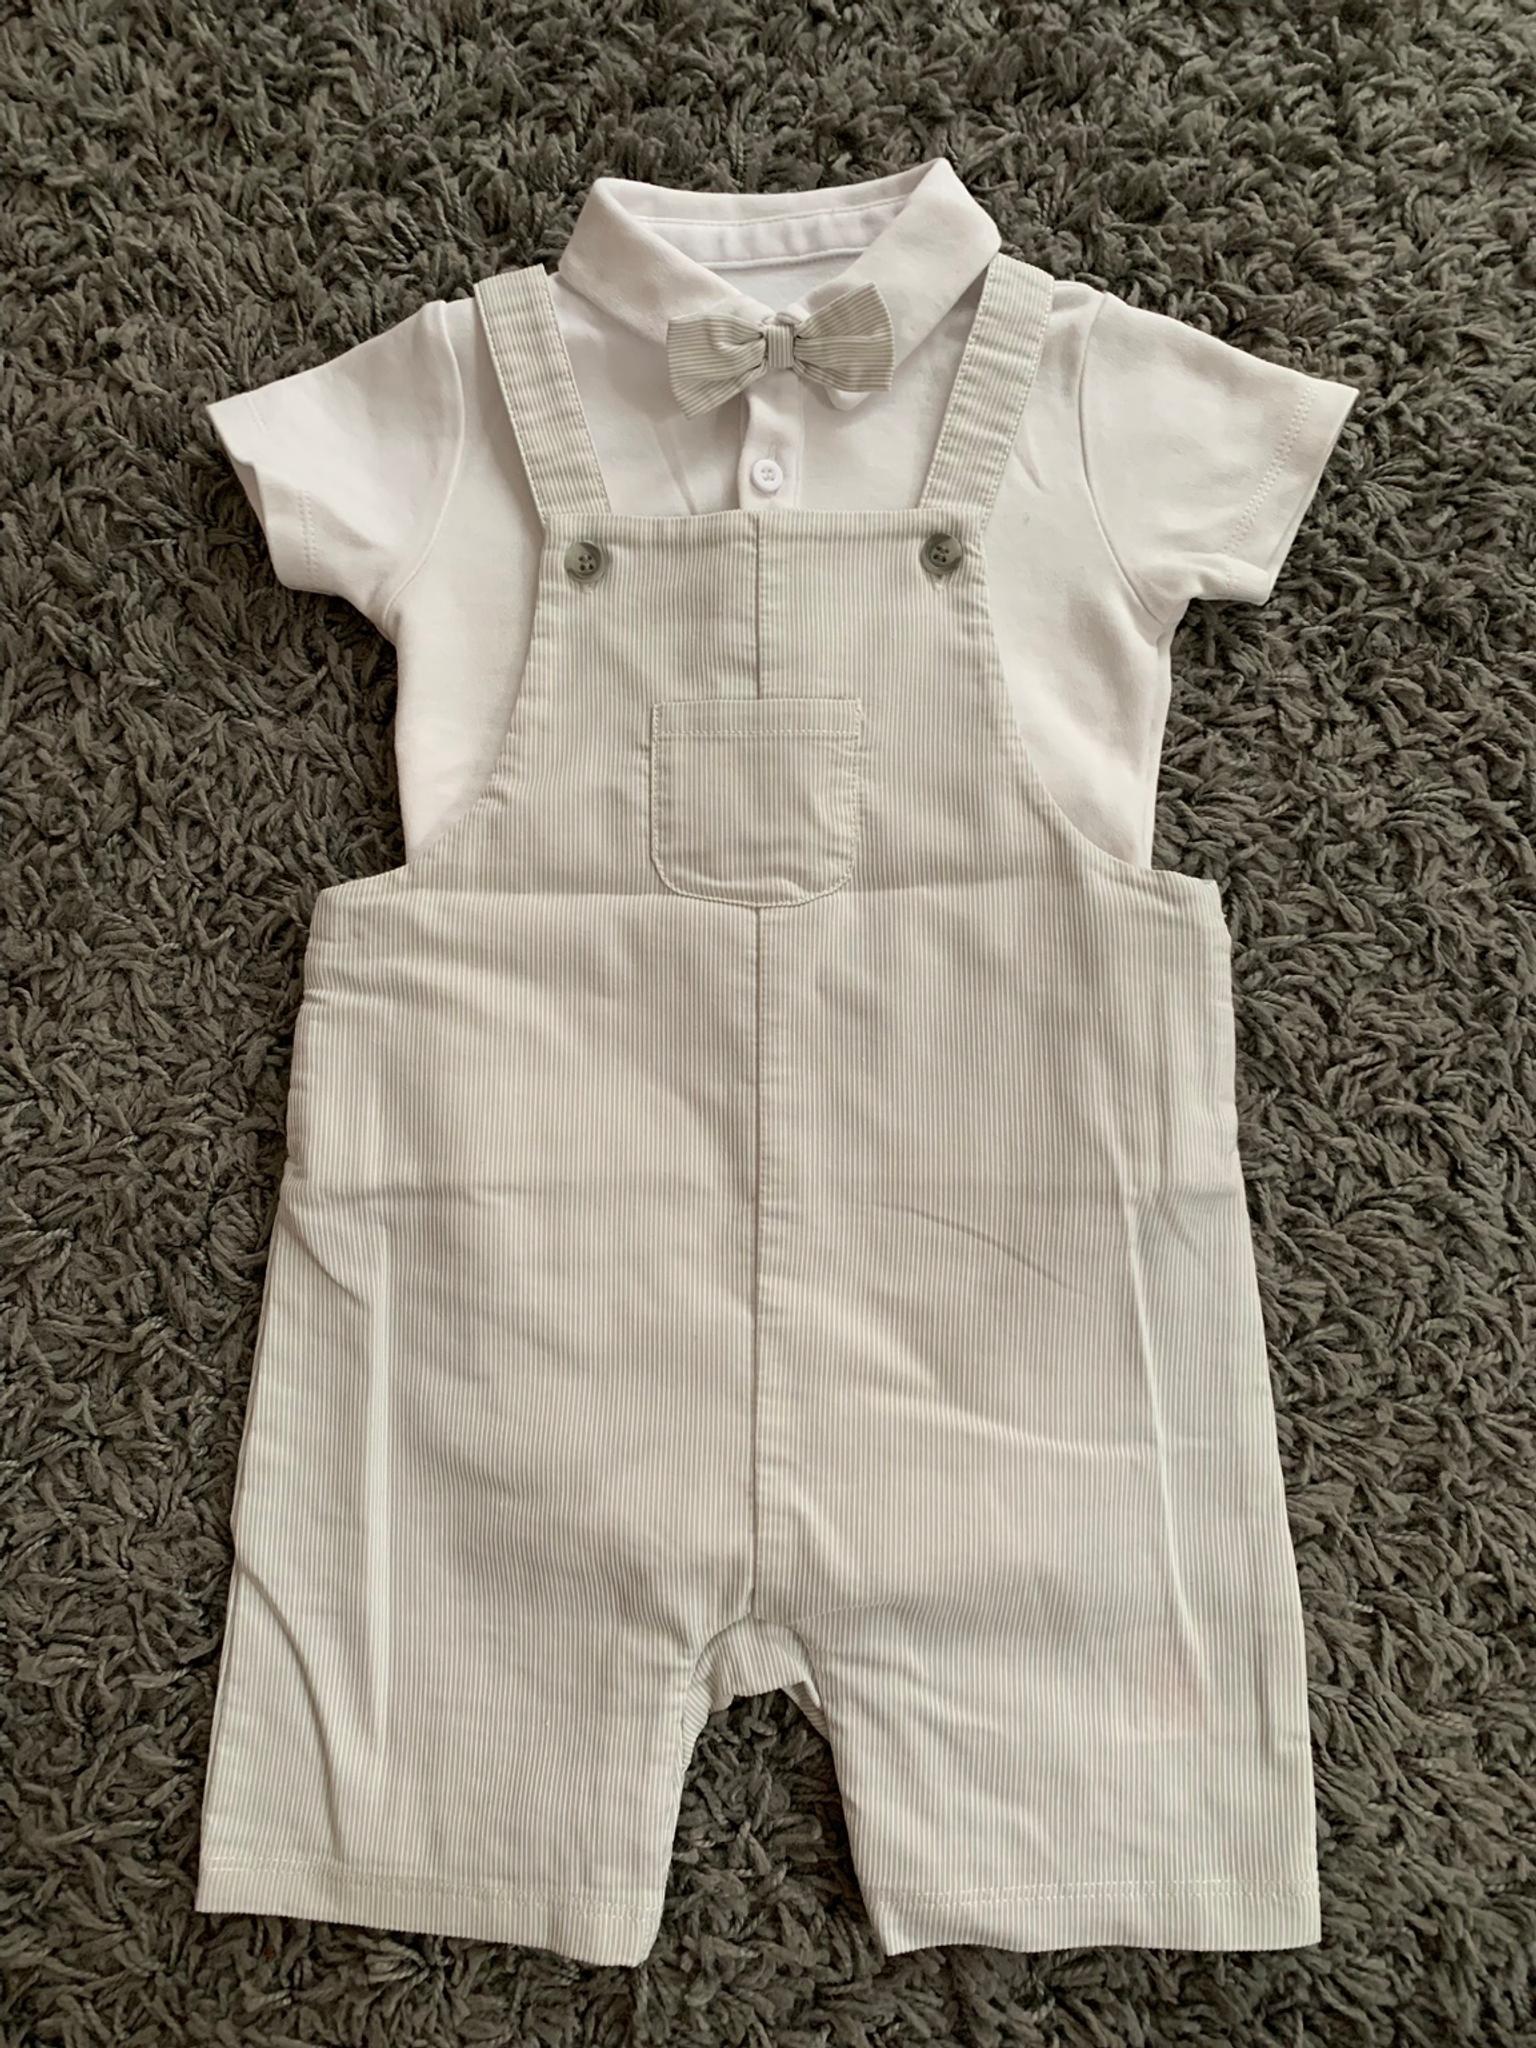 mothercare christening outfits